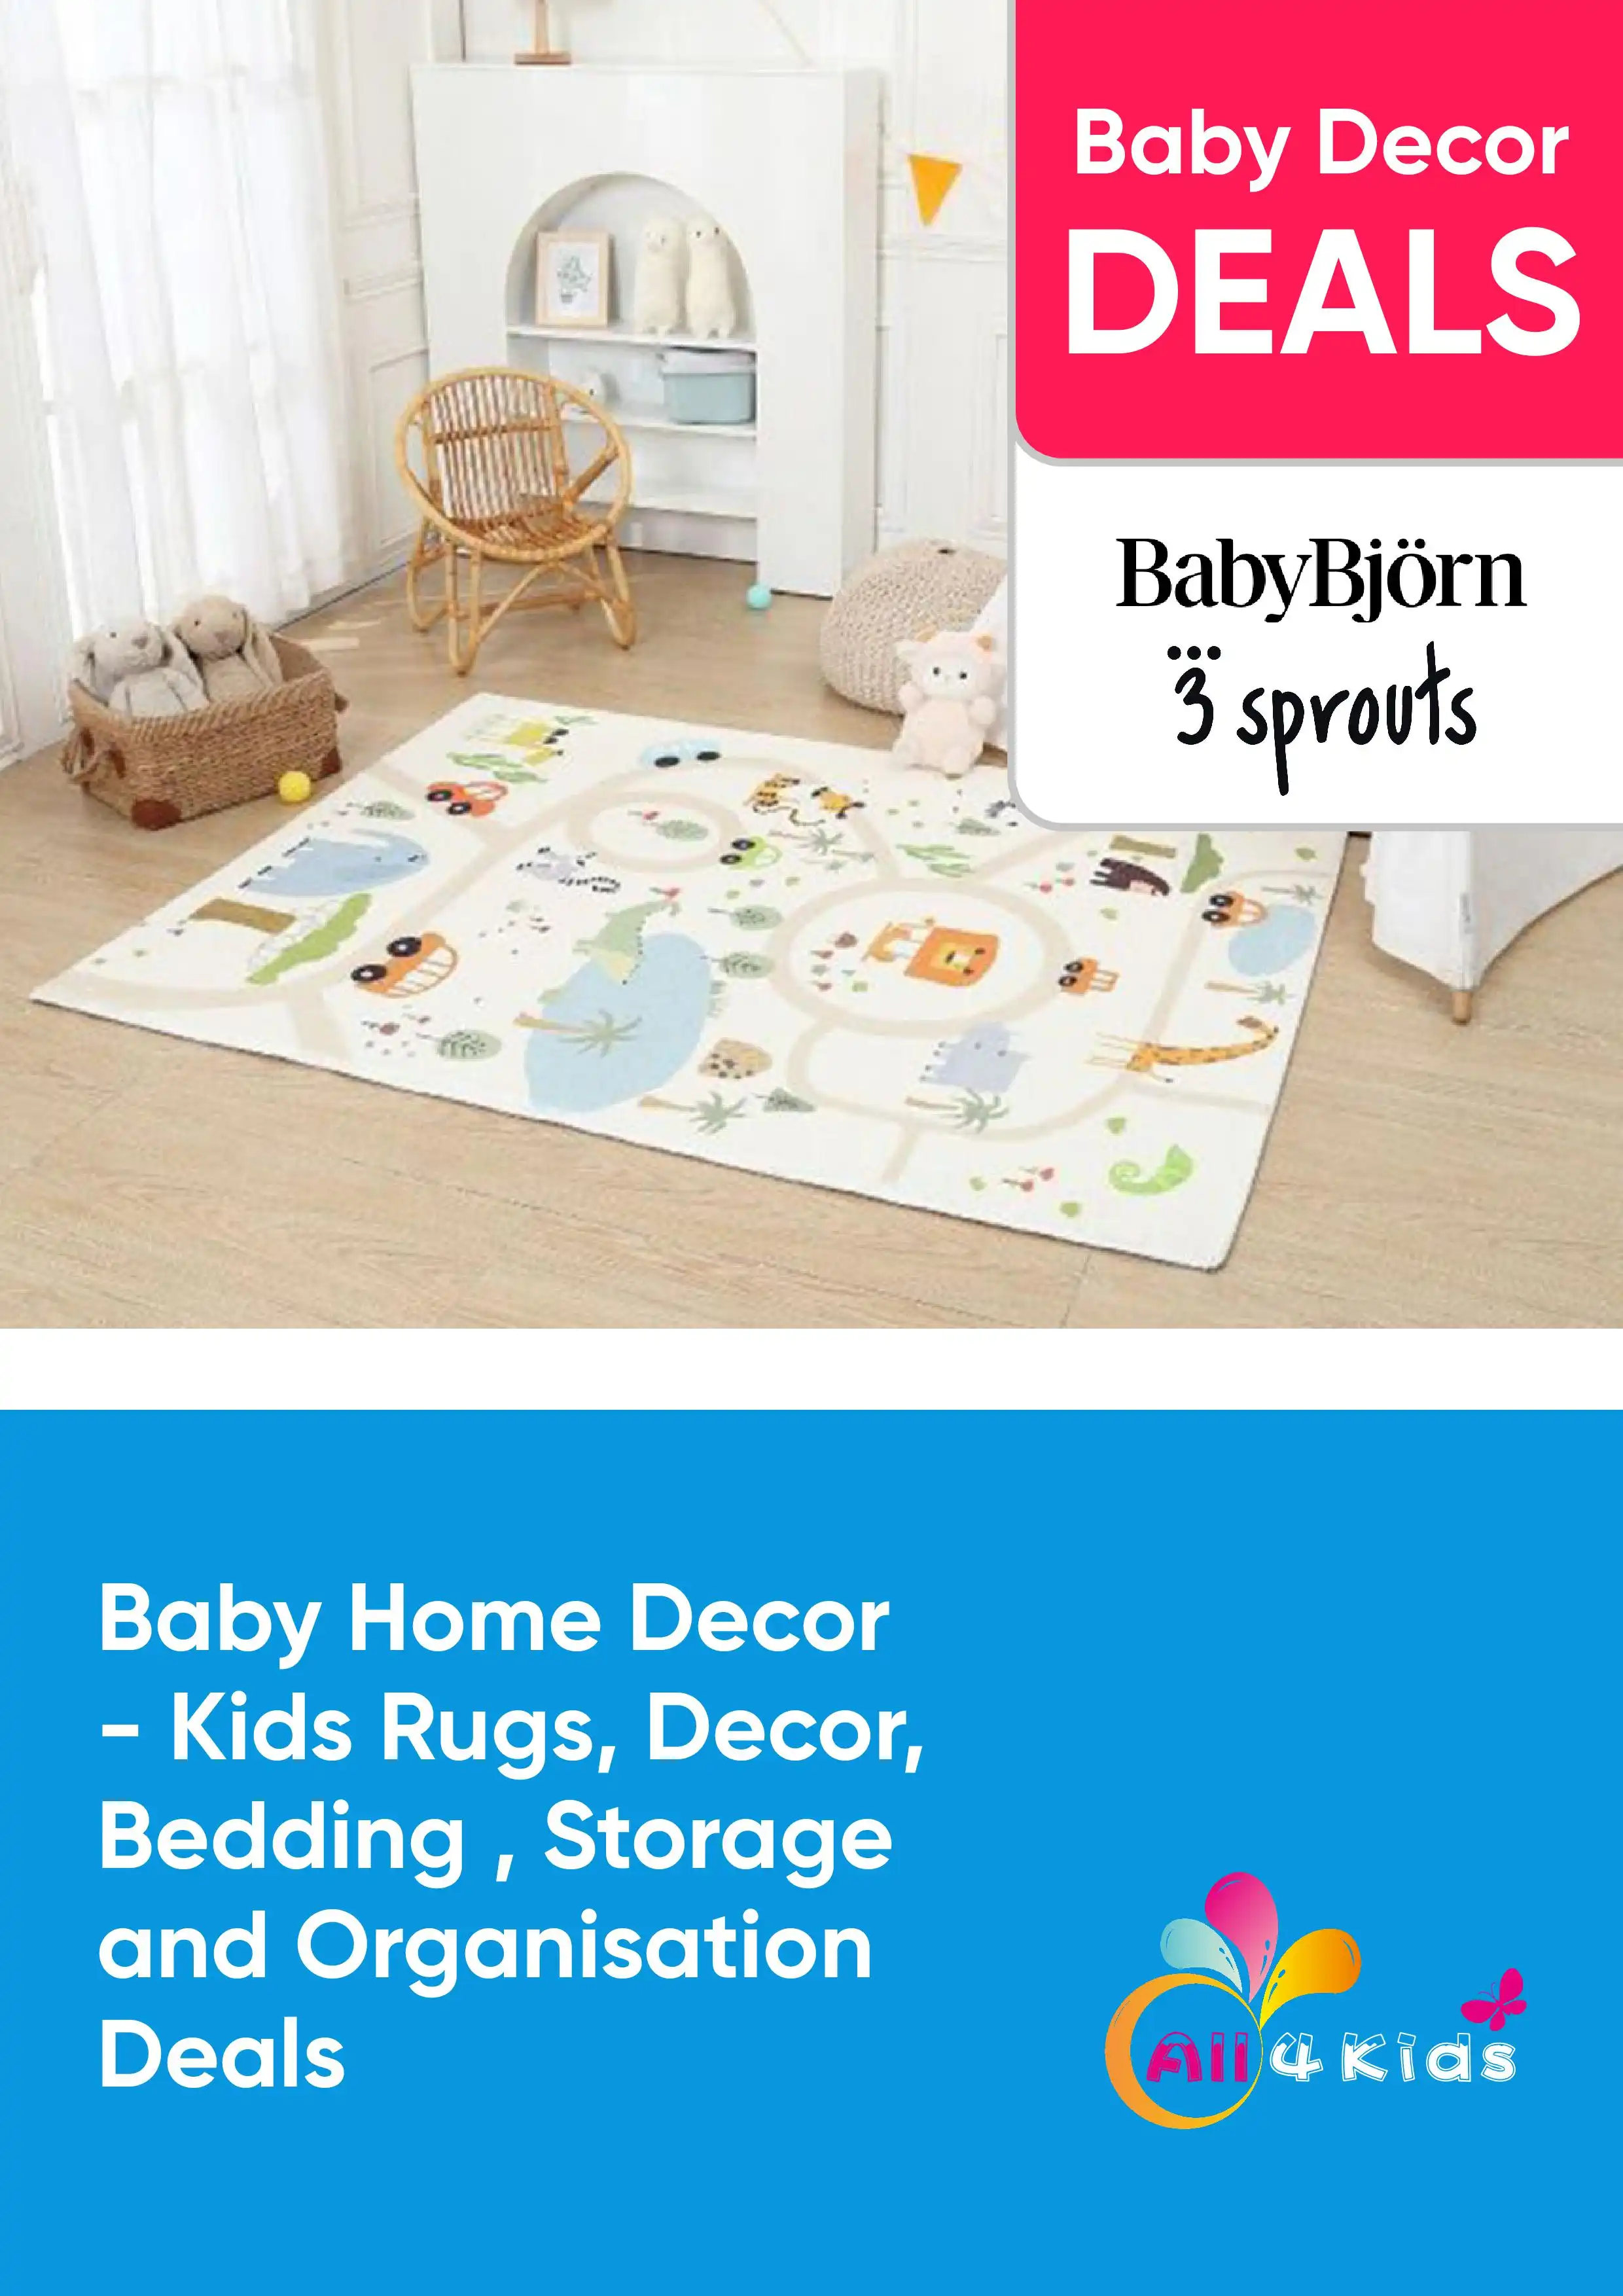 Baby Home Décor - Kids Rugs, Decor, Bedding, Storage and Organisation Deals